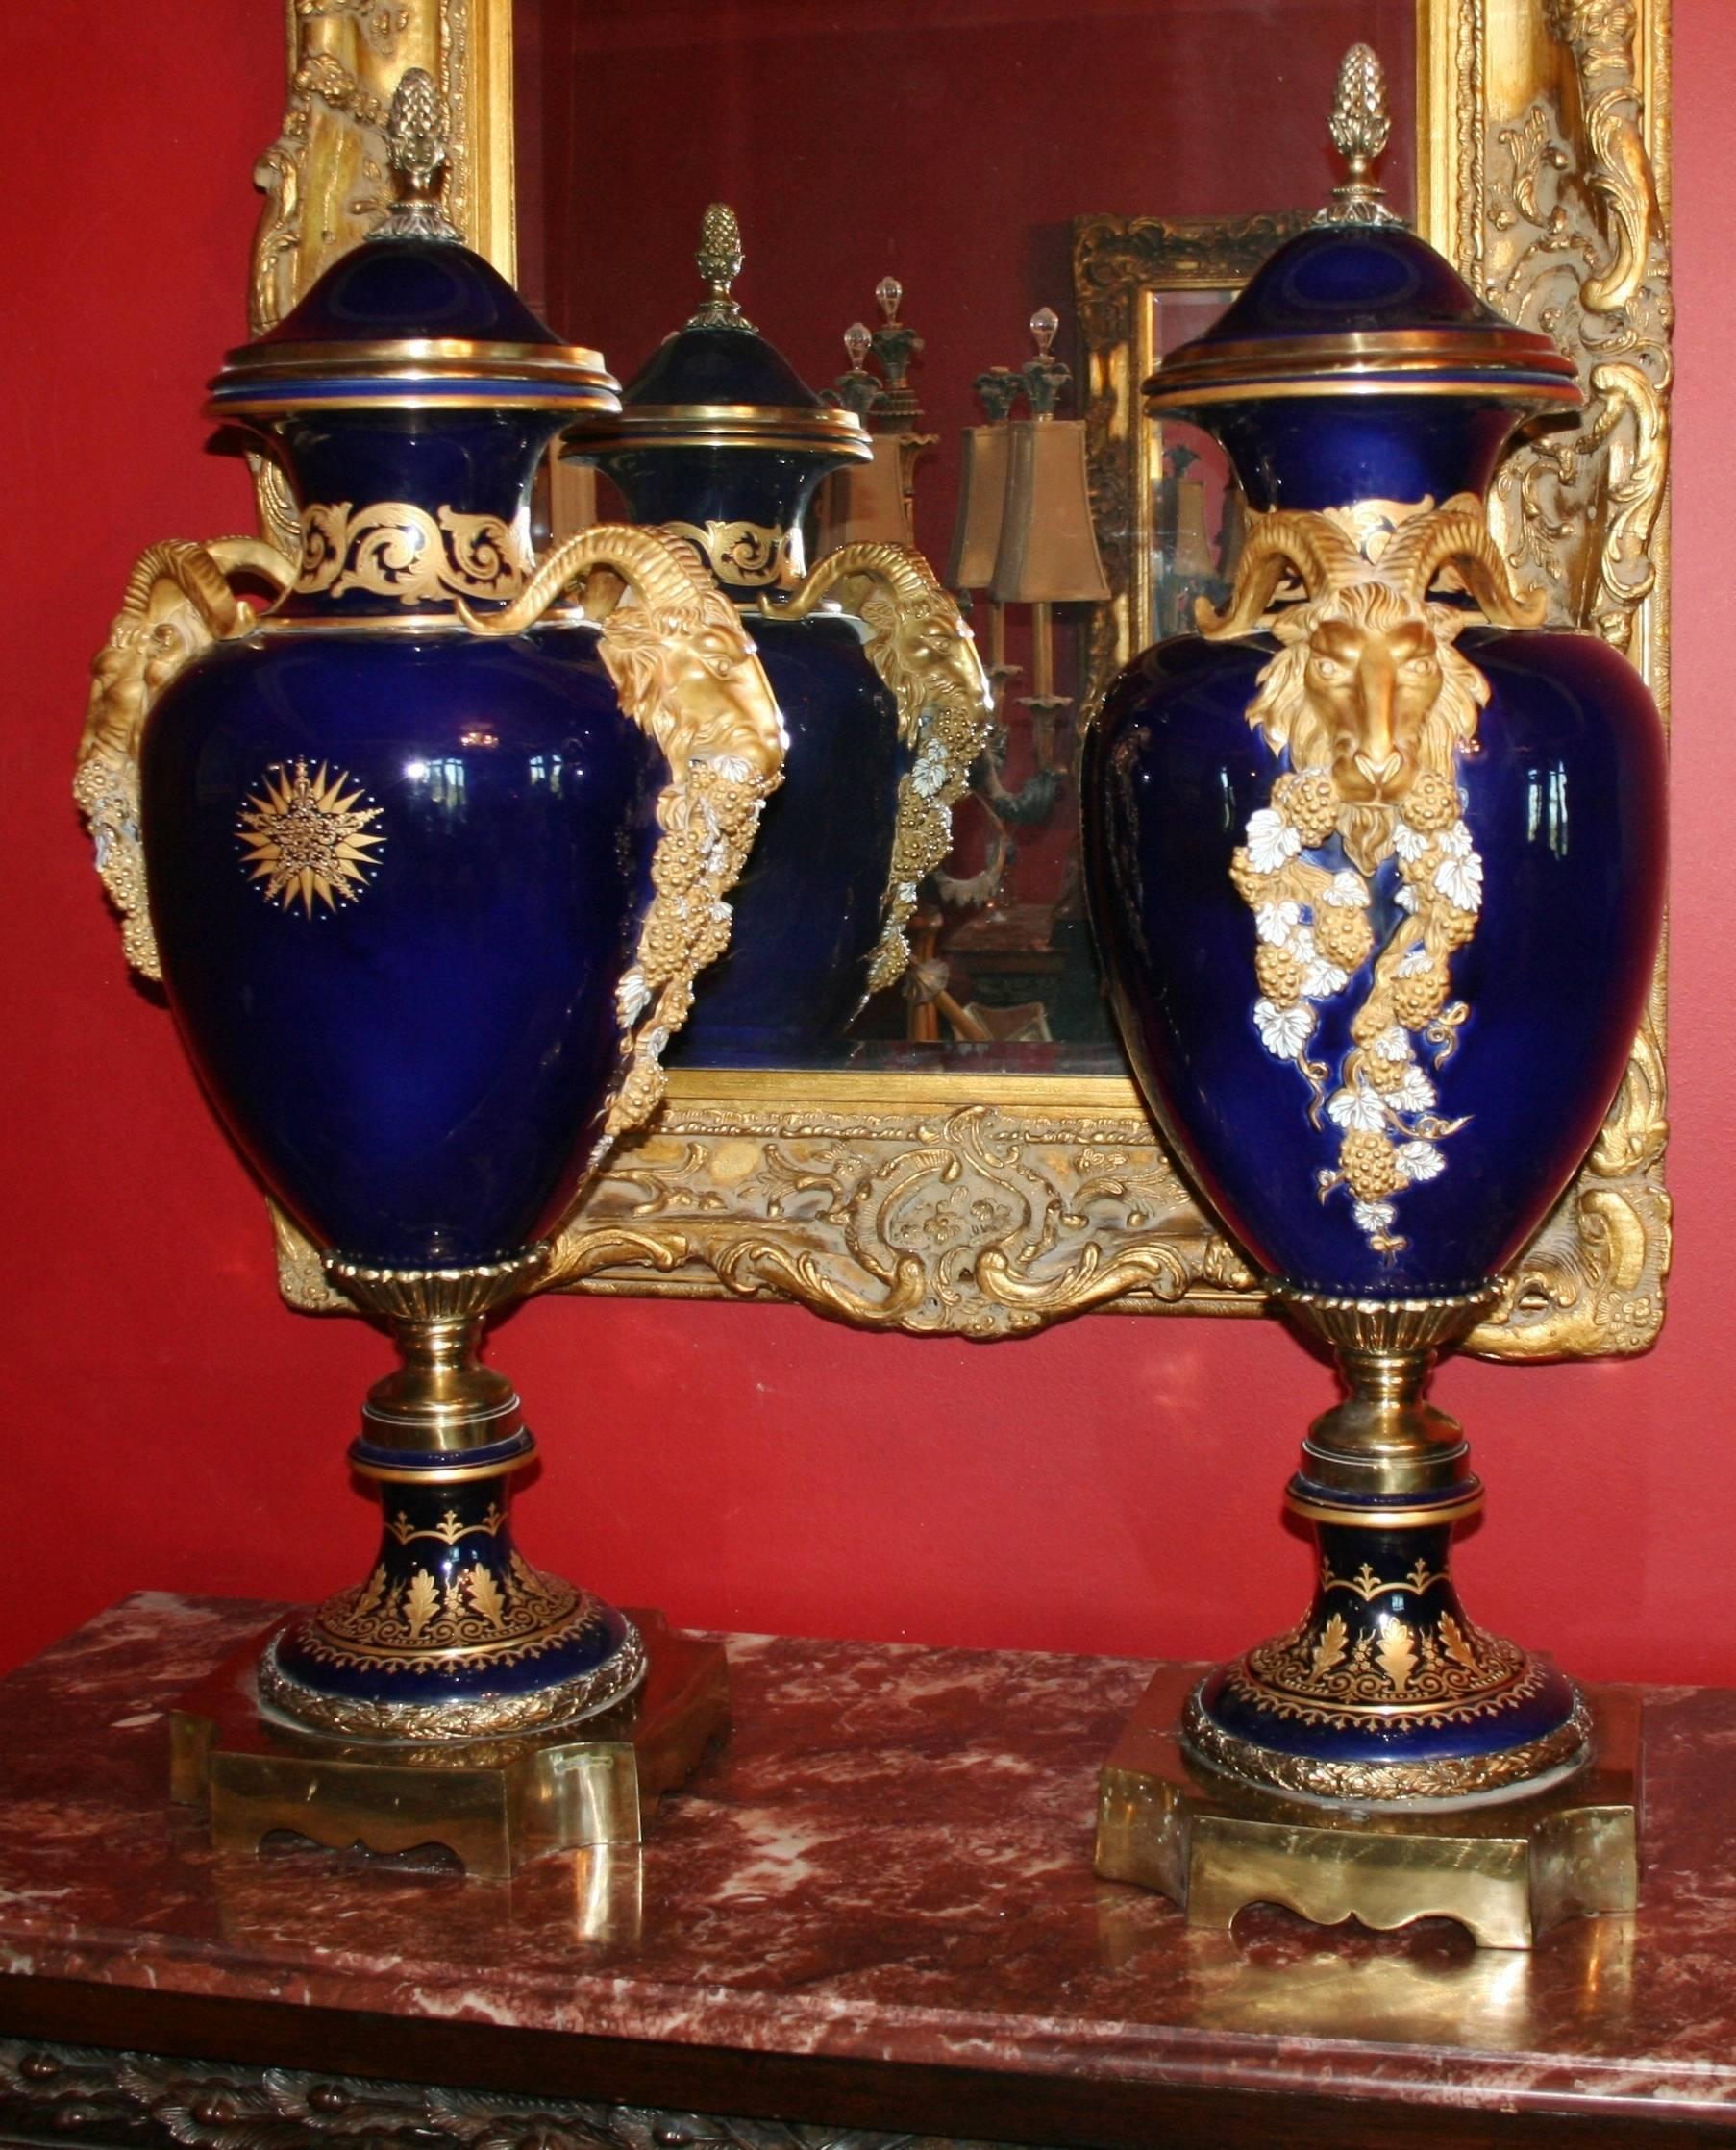 Composition 
Porcelain and ormolu

Height 
102 cm / 40 in

Shape 
Lidded urns

Ground 
Cobalt blue

Decoration 
Hand painted & gilded in a classical manner

Condition 
Very Good. No chips, cracks, repairs


Matched pair

Very